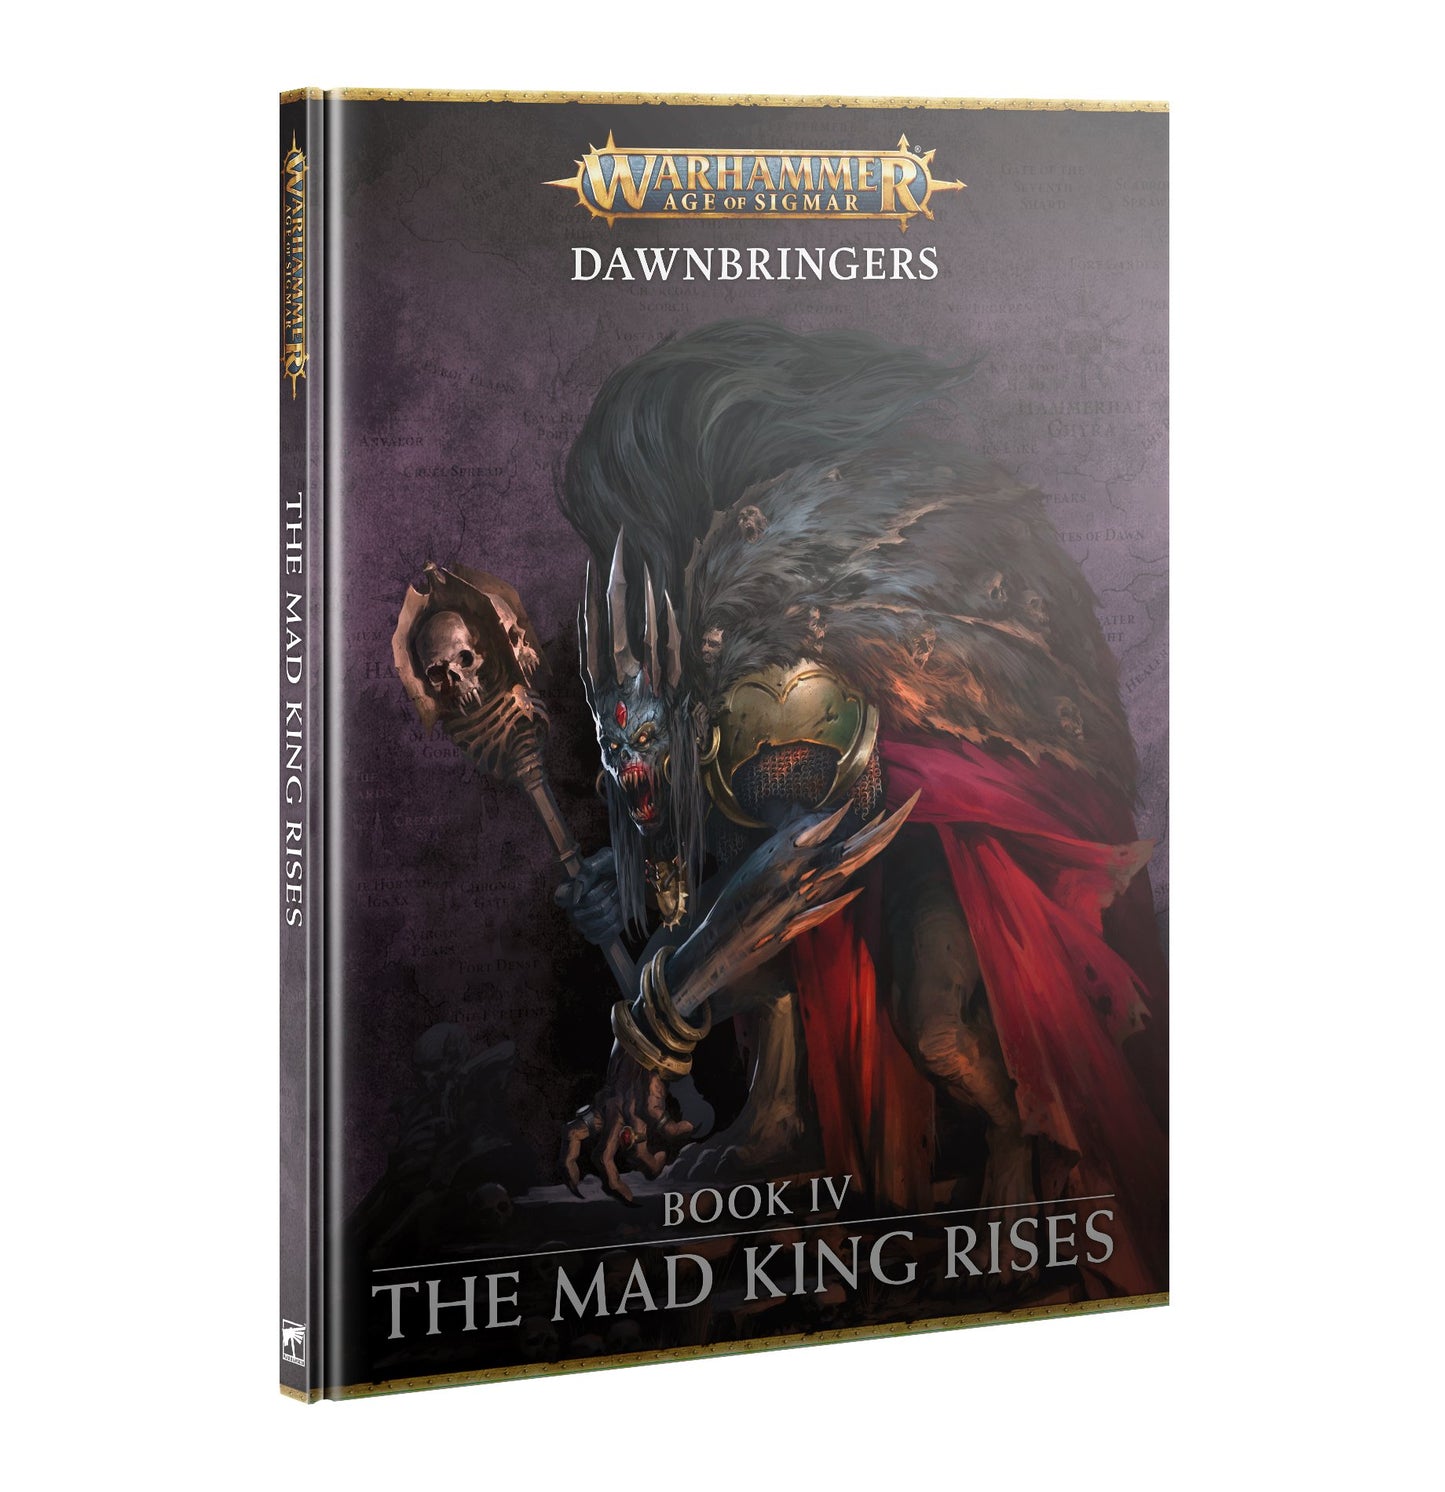 Age of Sigmar: The Mad King Rises